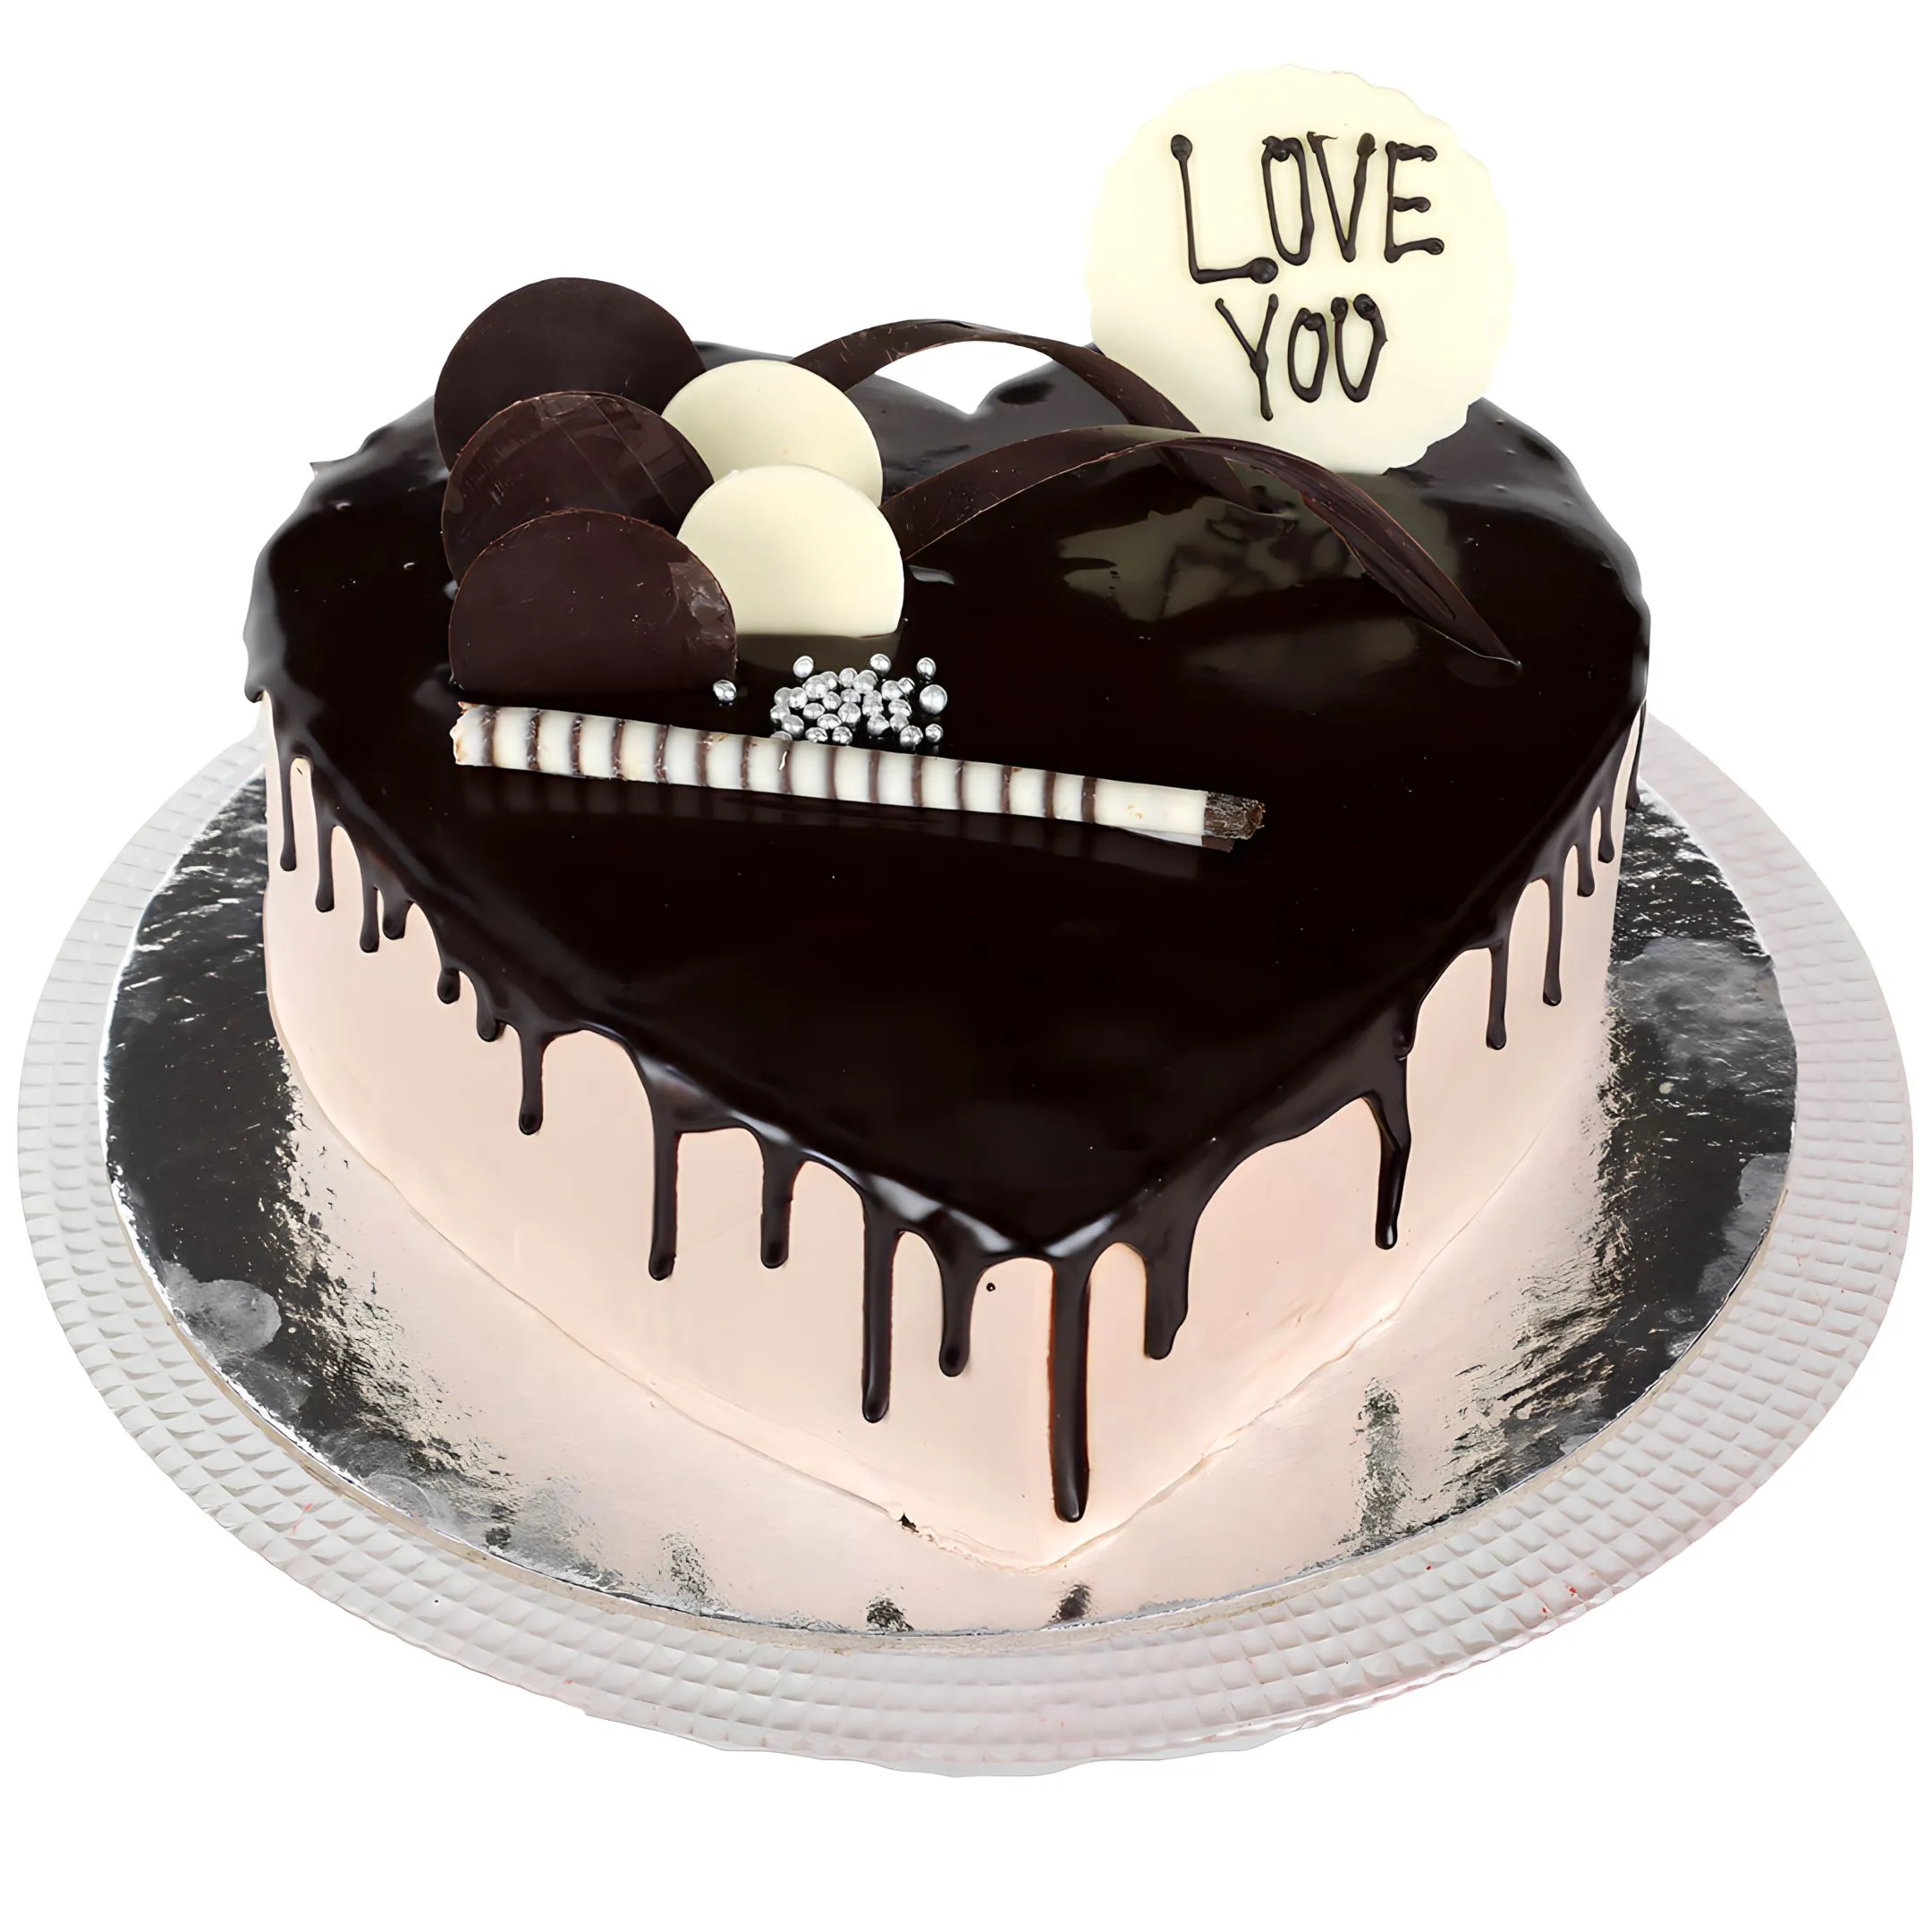 Delicious Heart Shaped Chocolate Eggless Cake